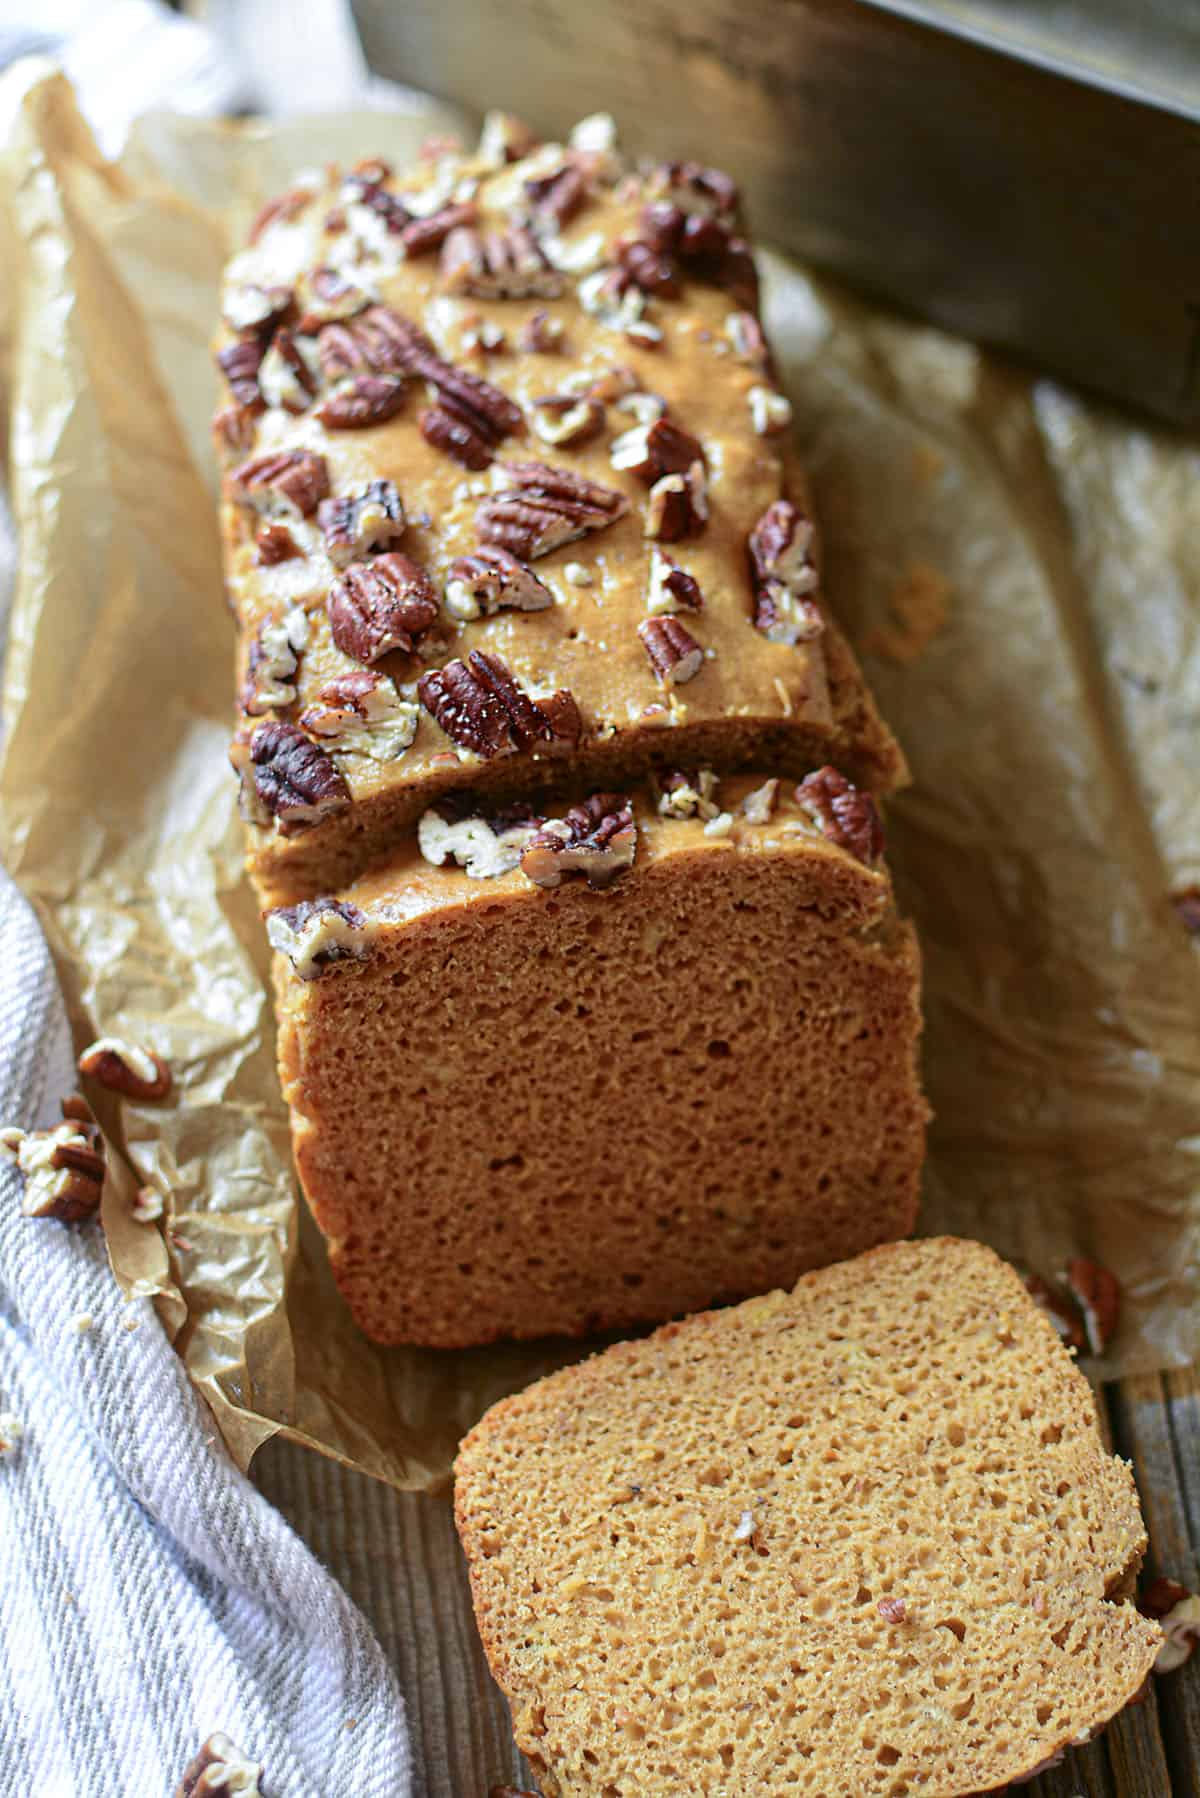 Banana bread with two slices resting on brown parchment paper.